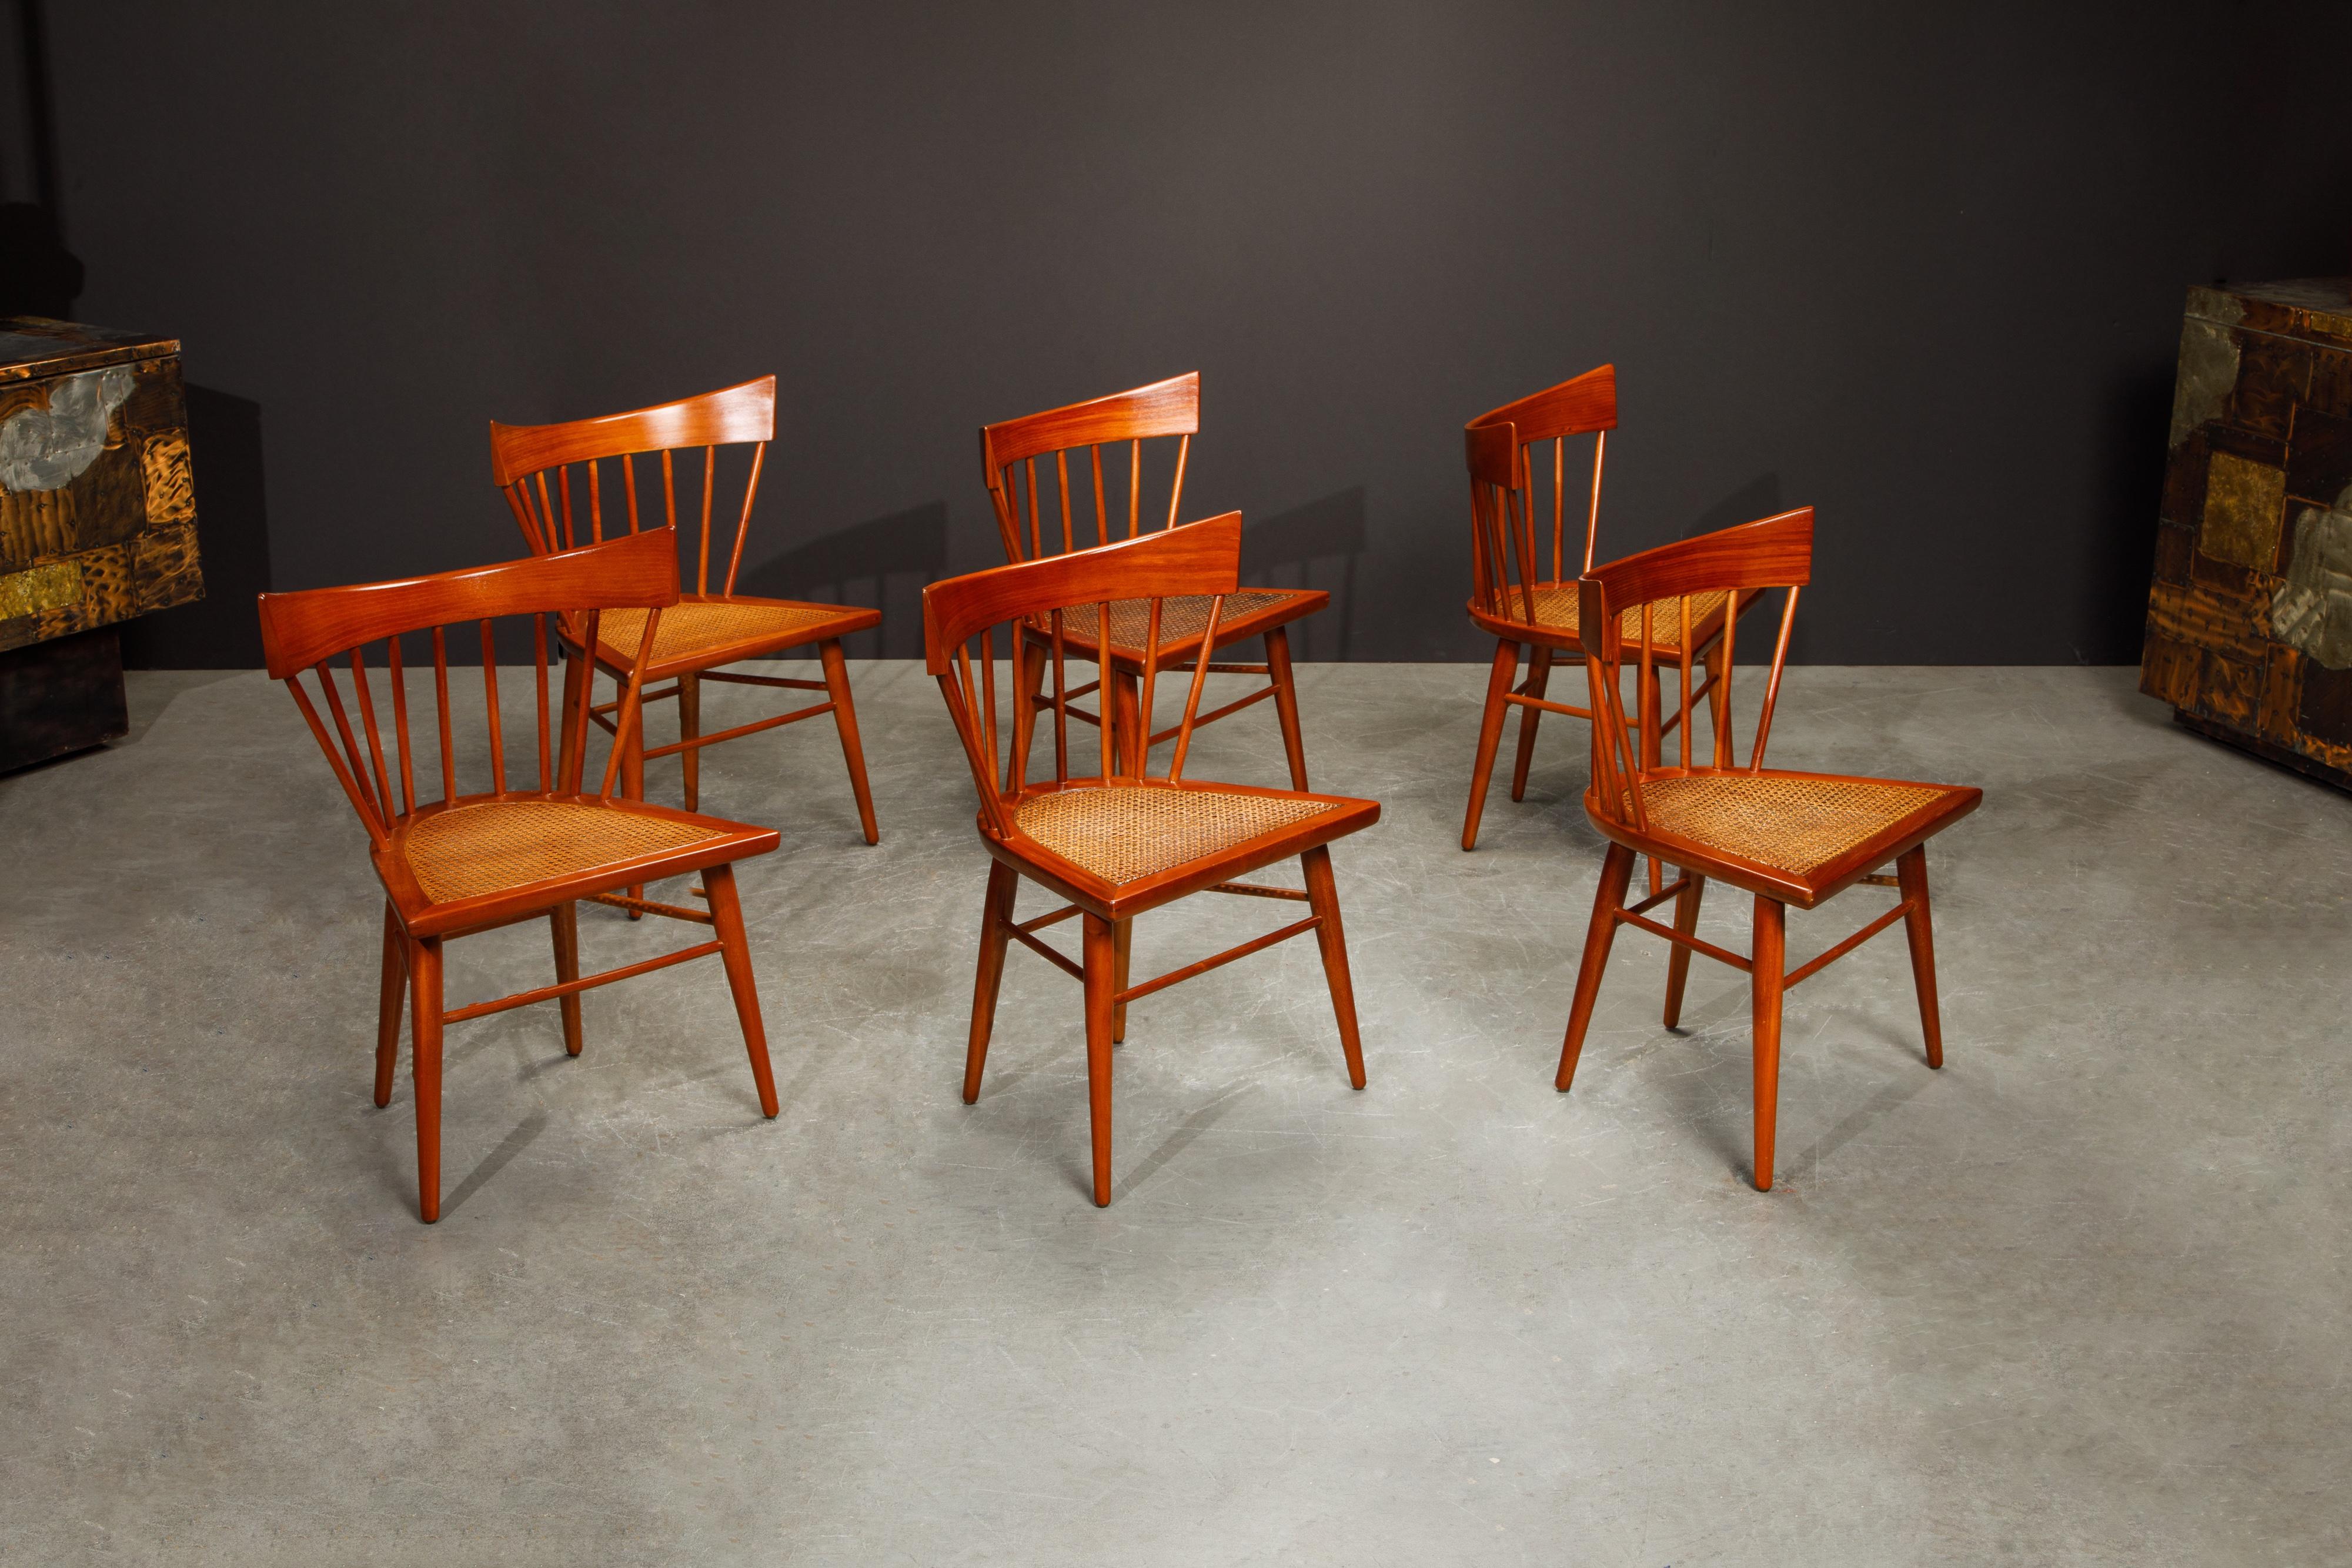 'Yucatan' Dining Chairs by Edmond Spence for Industria Mueblera, 1960s Signed In Good Condition For Sale In Los Angeles, CA